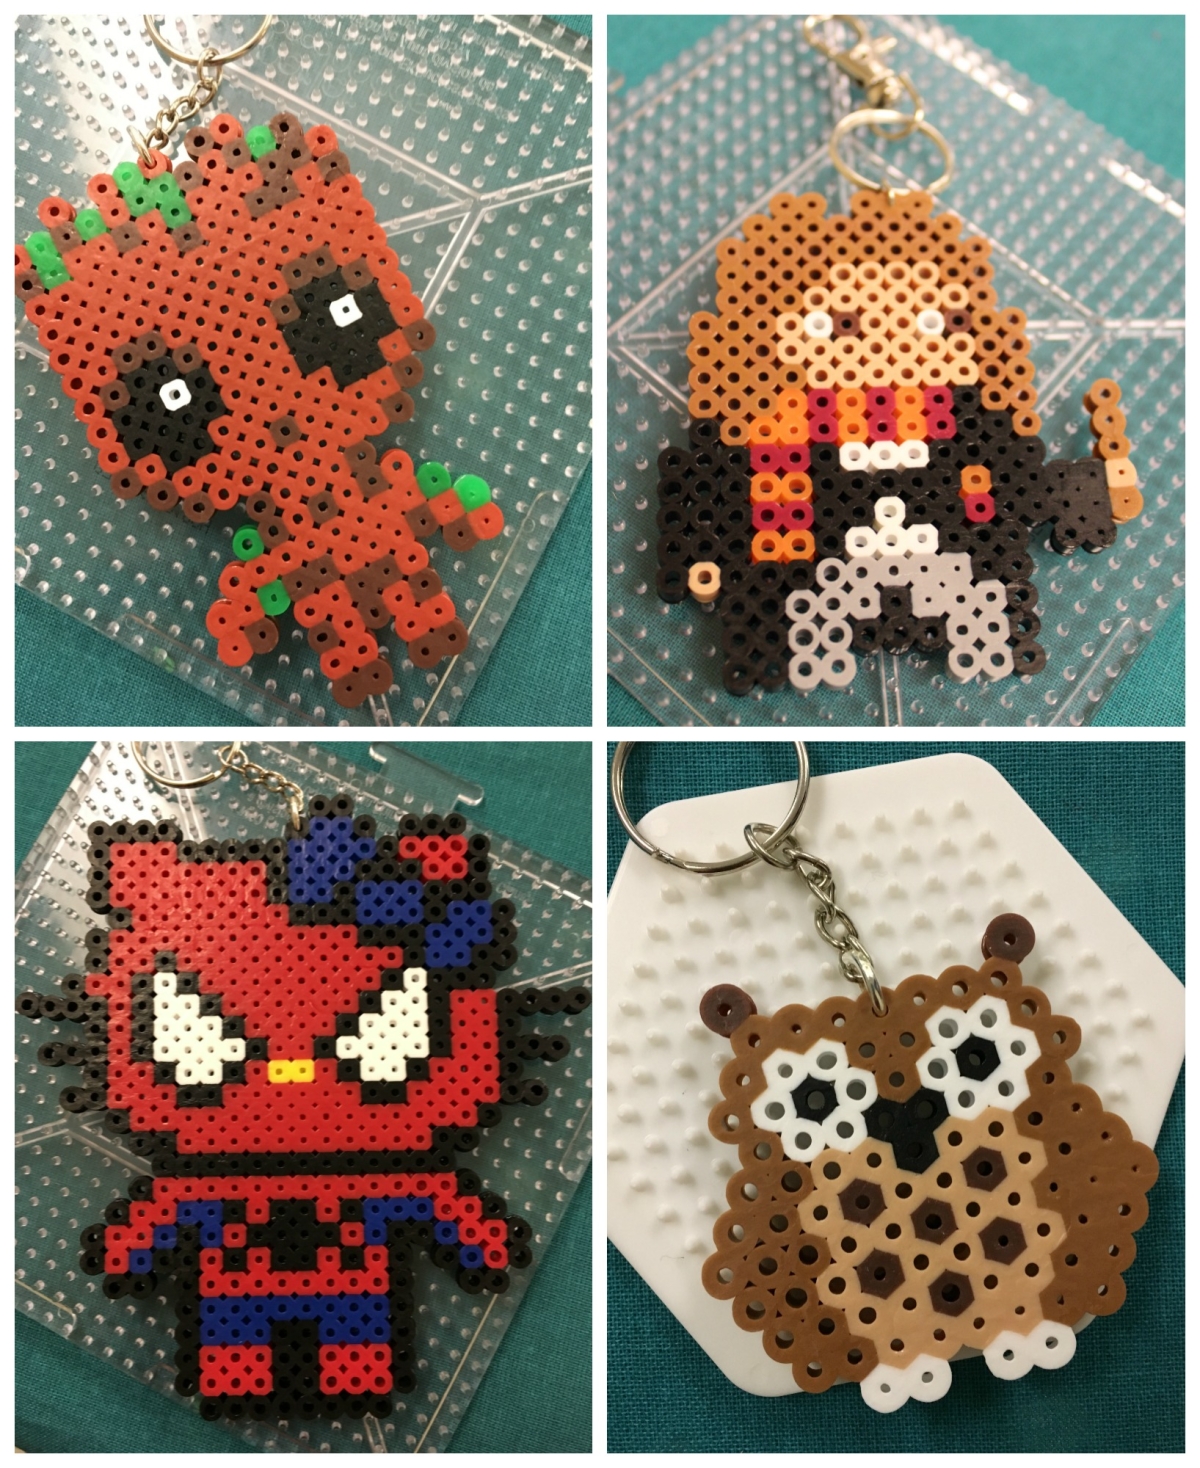 Examples of pixel art projects made with perler beads: Baby Groot, Hermoine, Hello Kitty Spider-Man, and Owl key chains